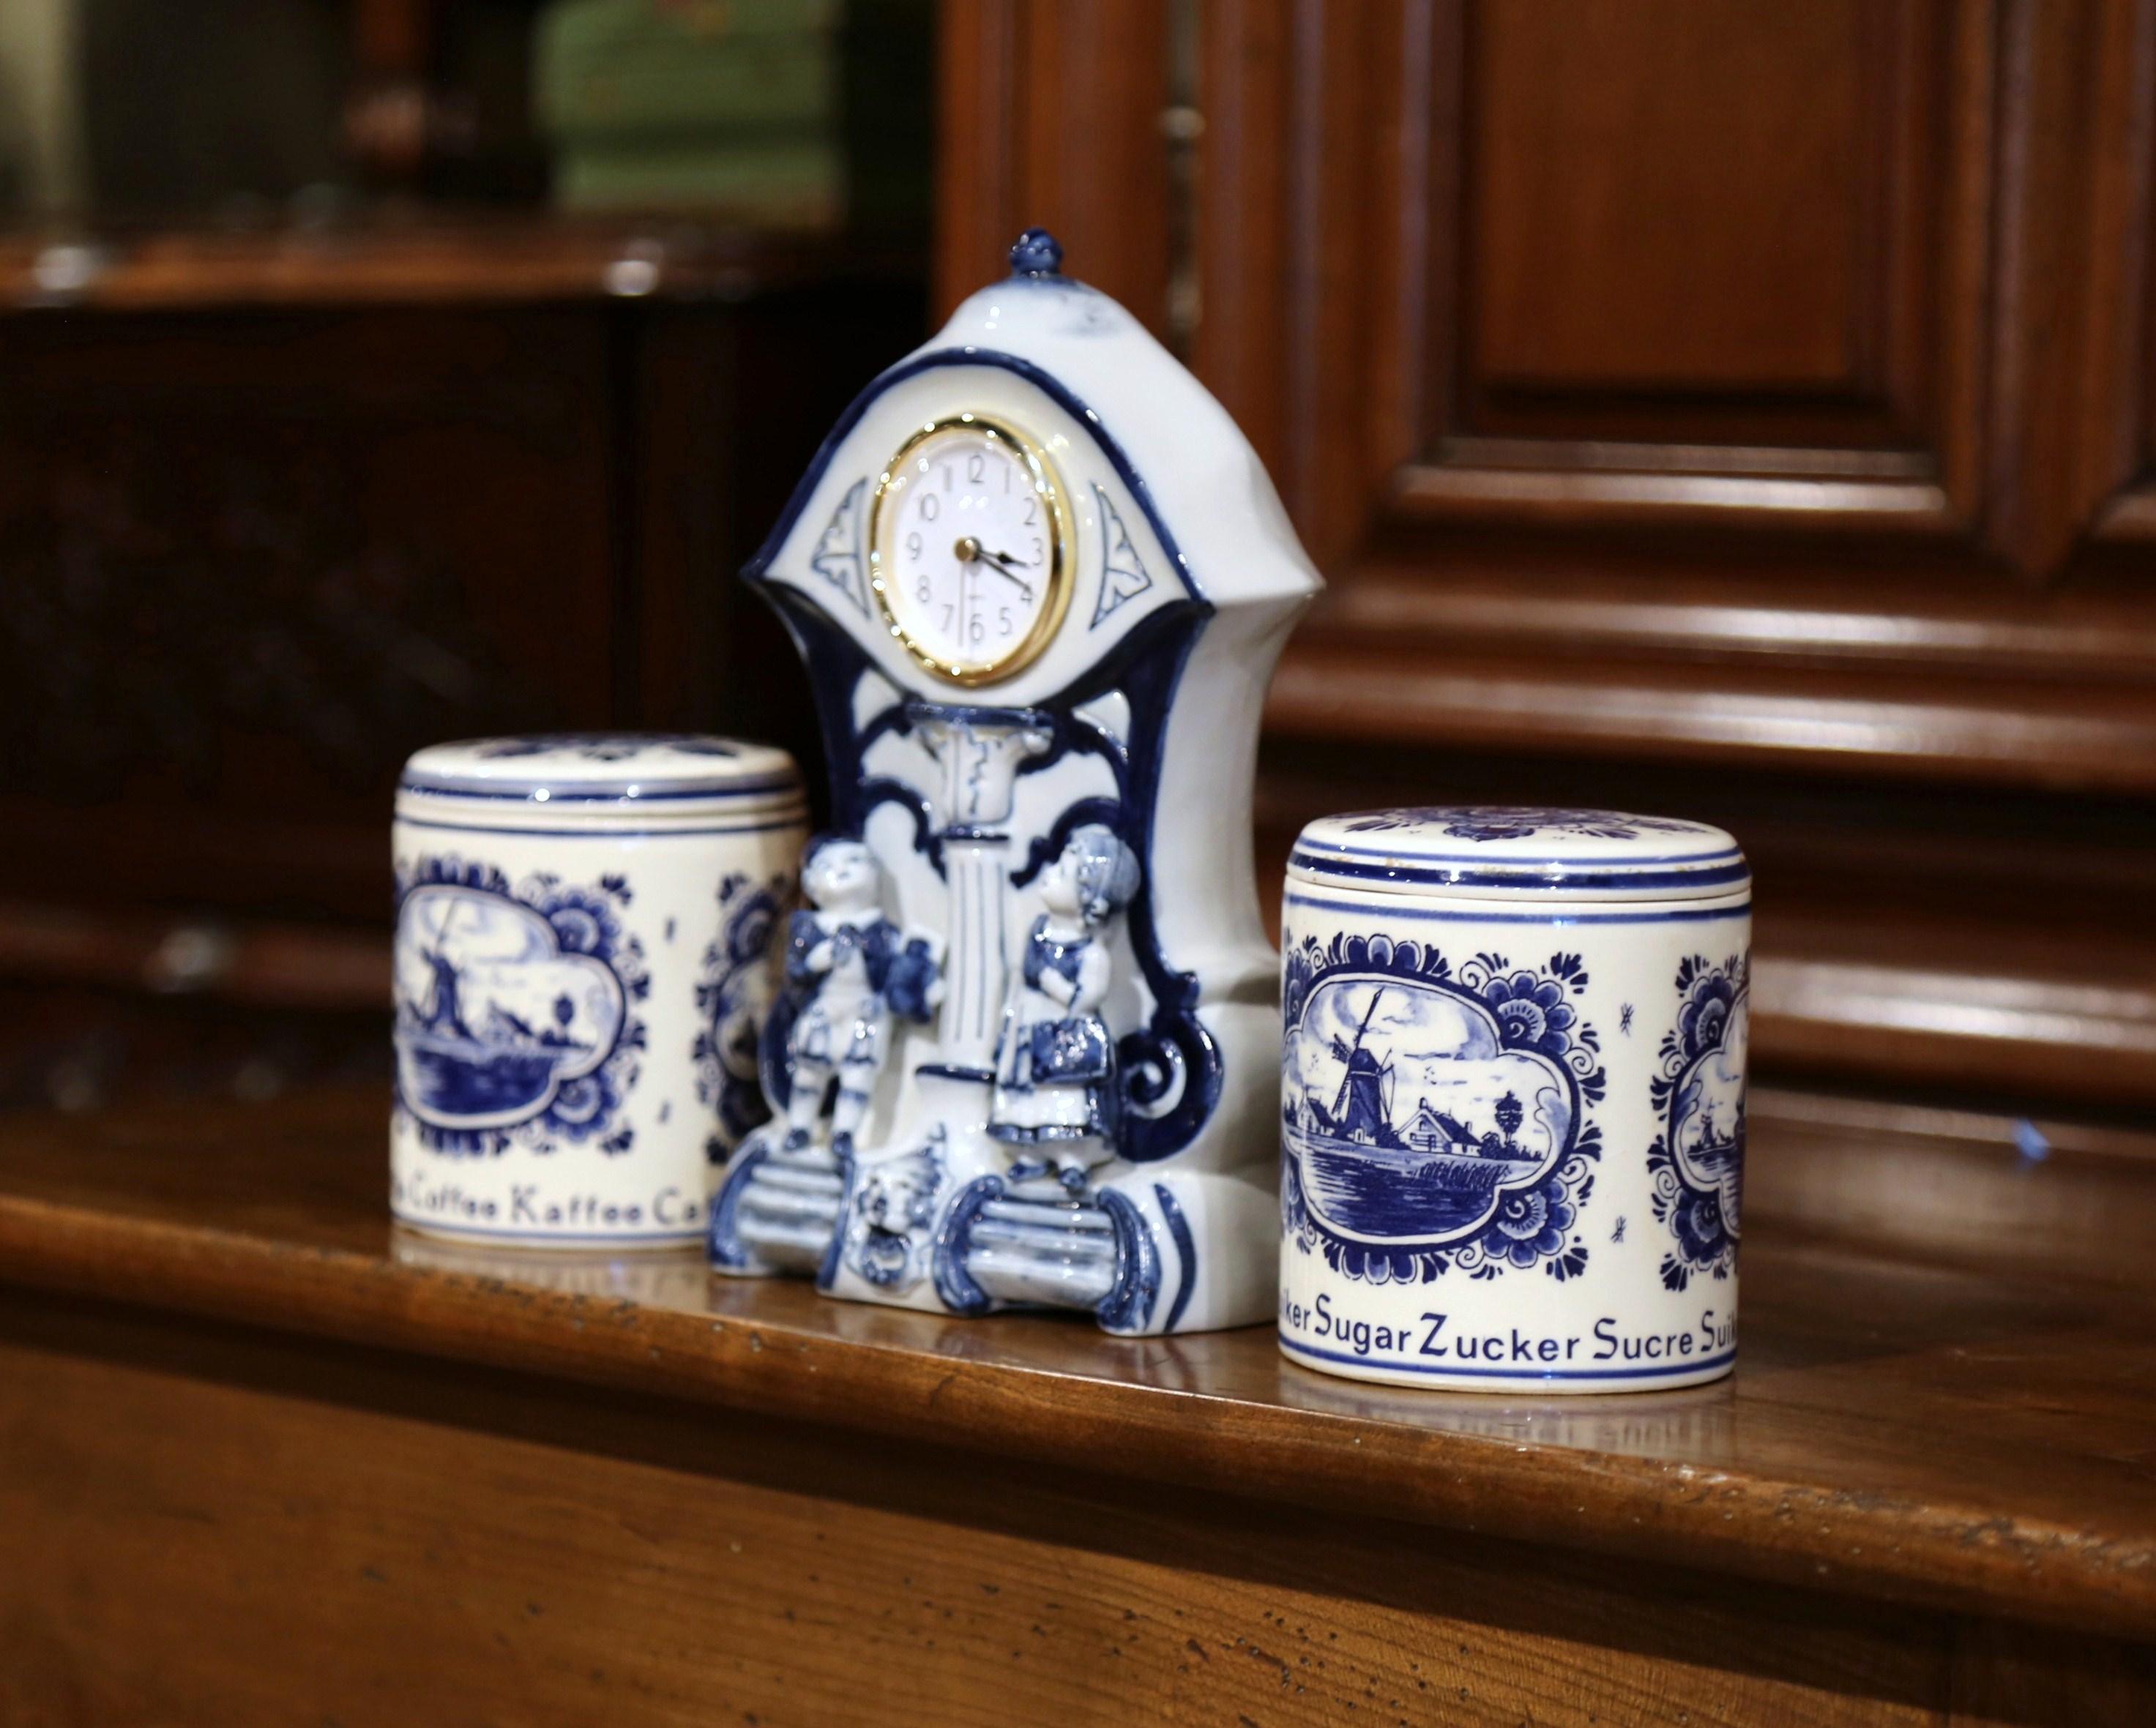 Decorate your kitchen counter with these sugar and flour ceramic canisters and a table clock; crafted in Holland circa 1920, each canister has a round lid and features blue and white floral decor with traditional sailboat and windmill. The sugar and